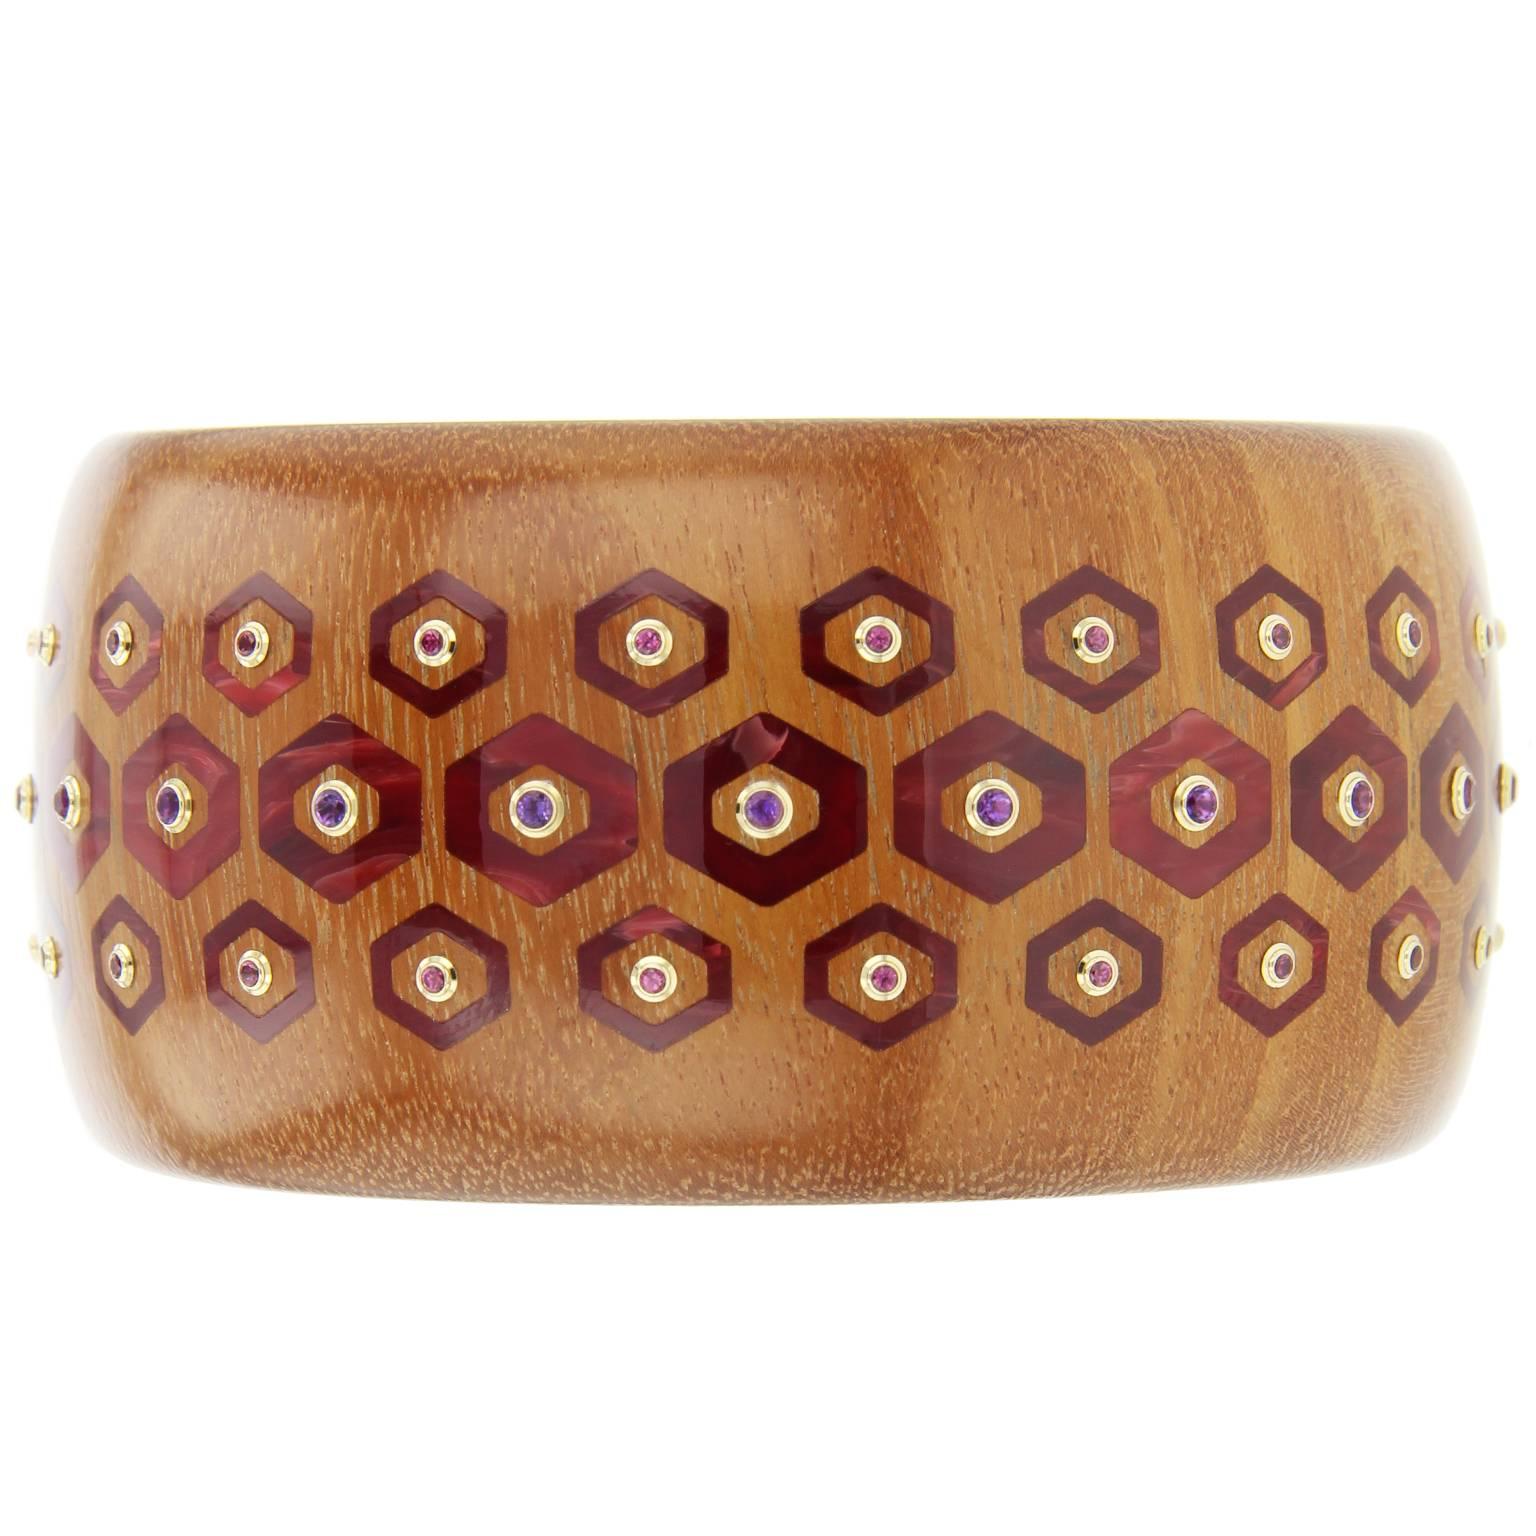 This classic Mark Davis bangle was handcrafted of tempisque wood and inlaid with hexagonal shaped pieces of burgundy bakelite.  At the center of each hexagon is an amethyst or rhodolite garnet, bezel-set in 18k yellow gold.  

Full details below: 
•